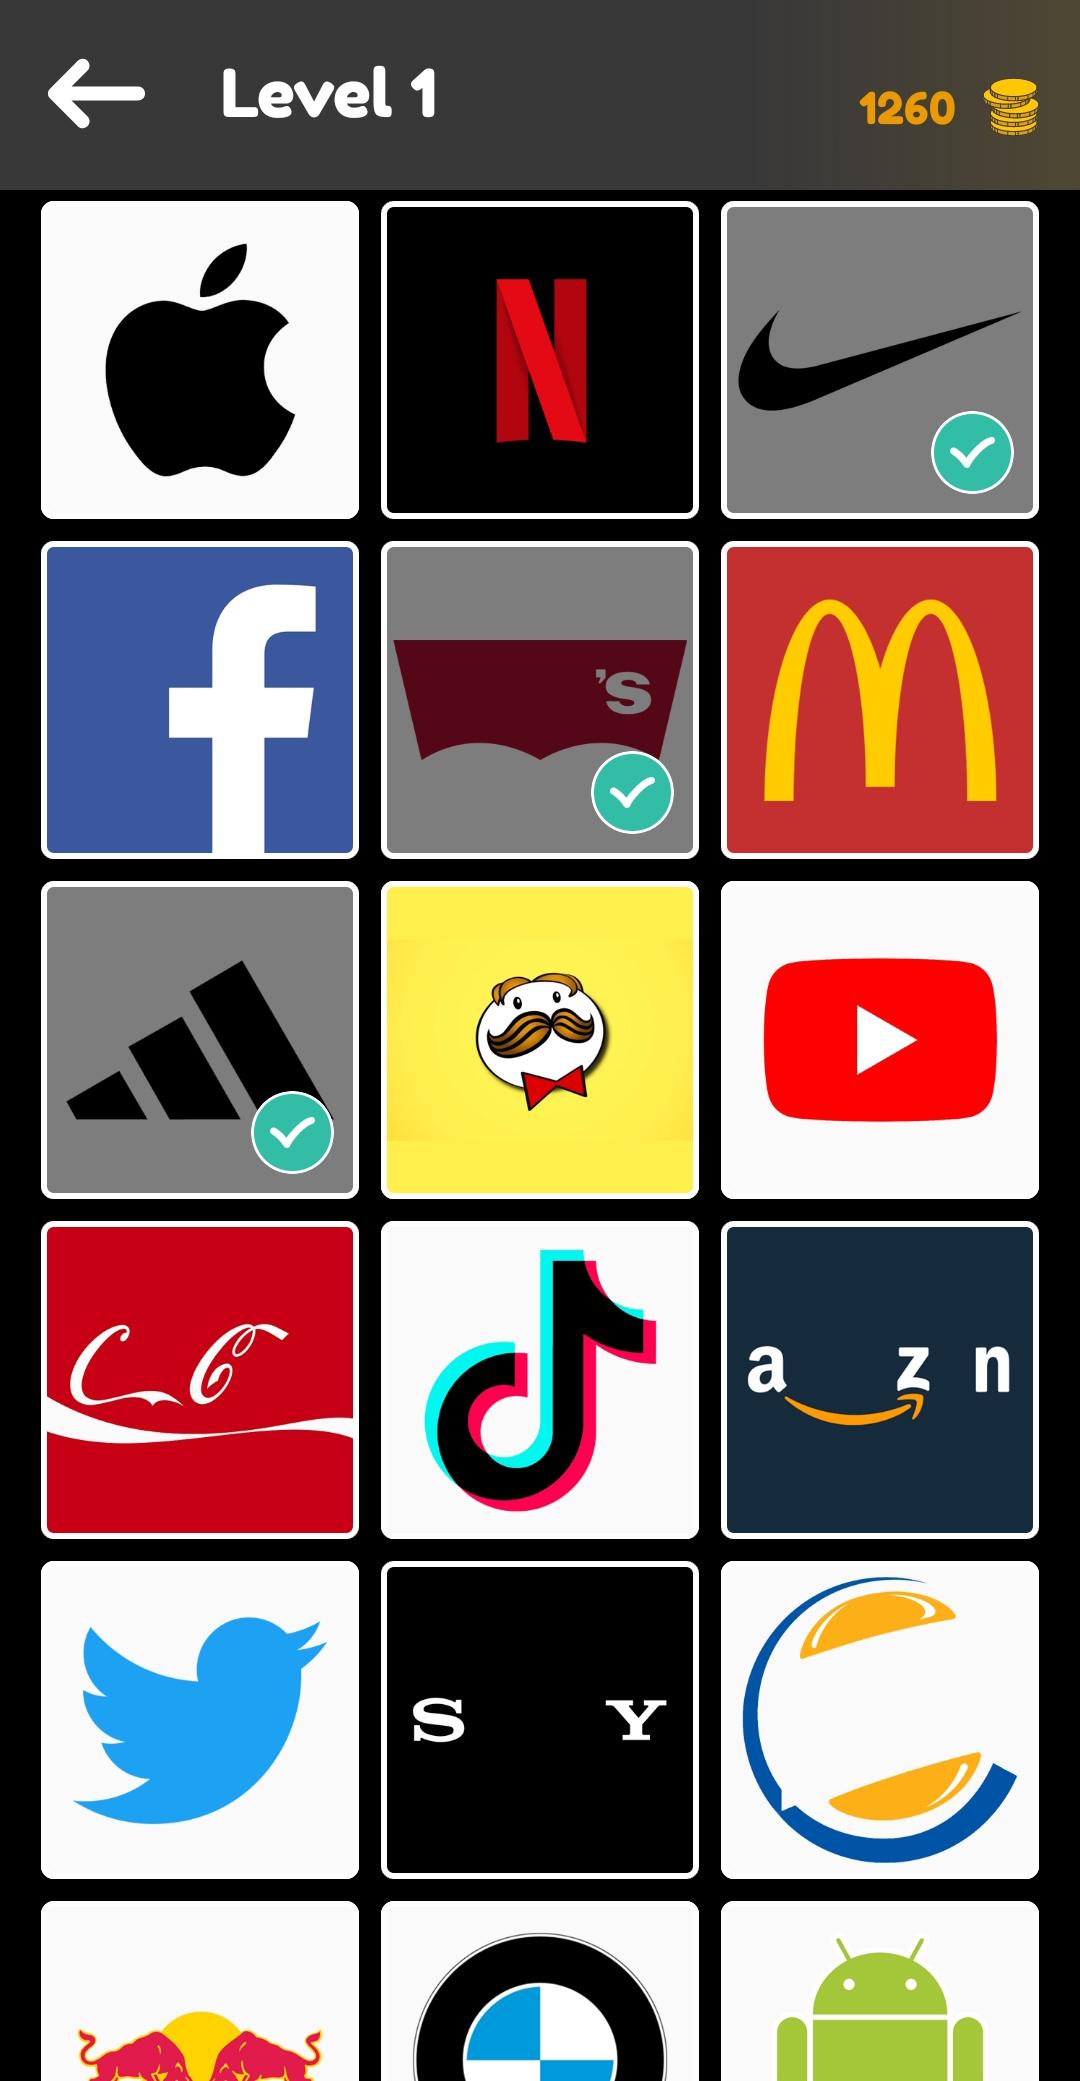 Logo Game Guess The Brand for Android - APK Download